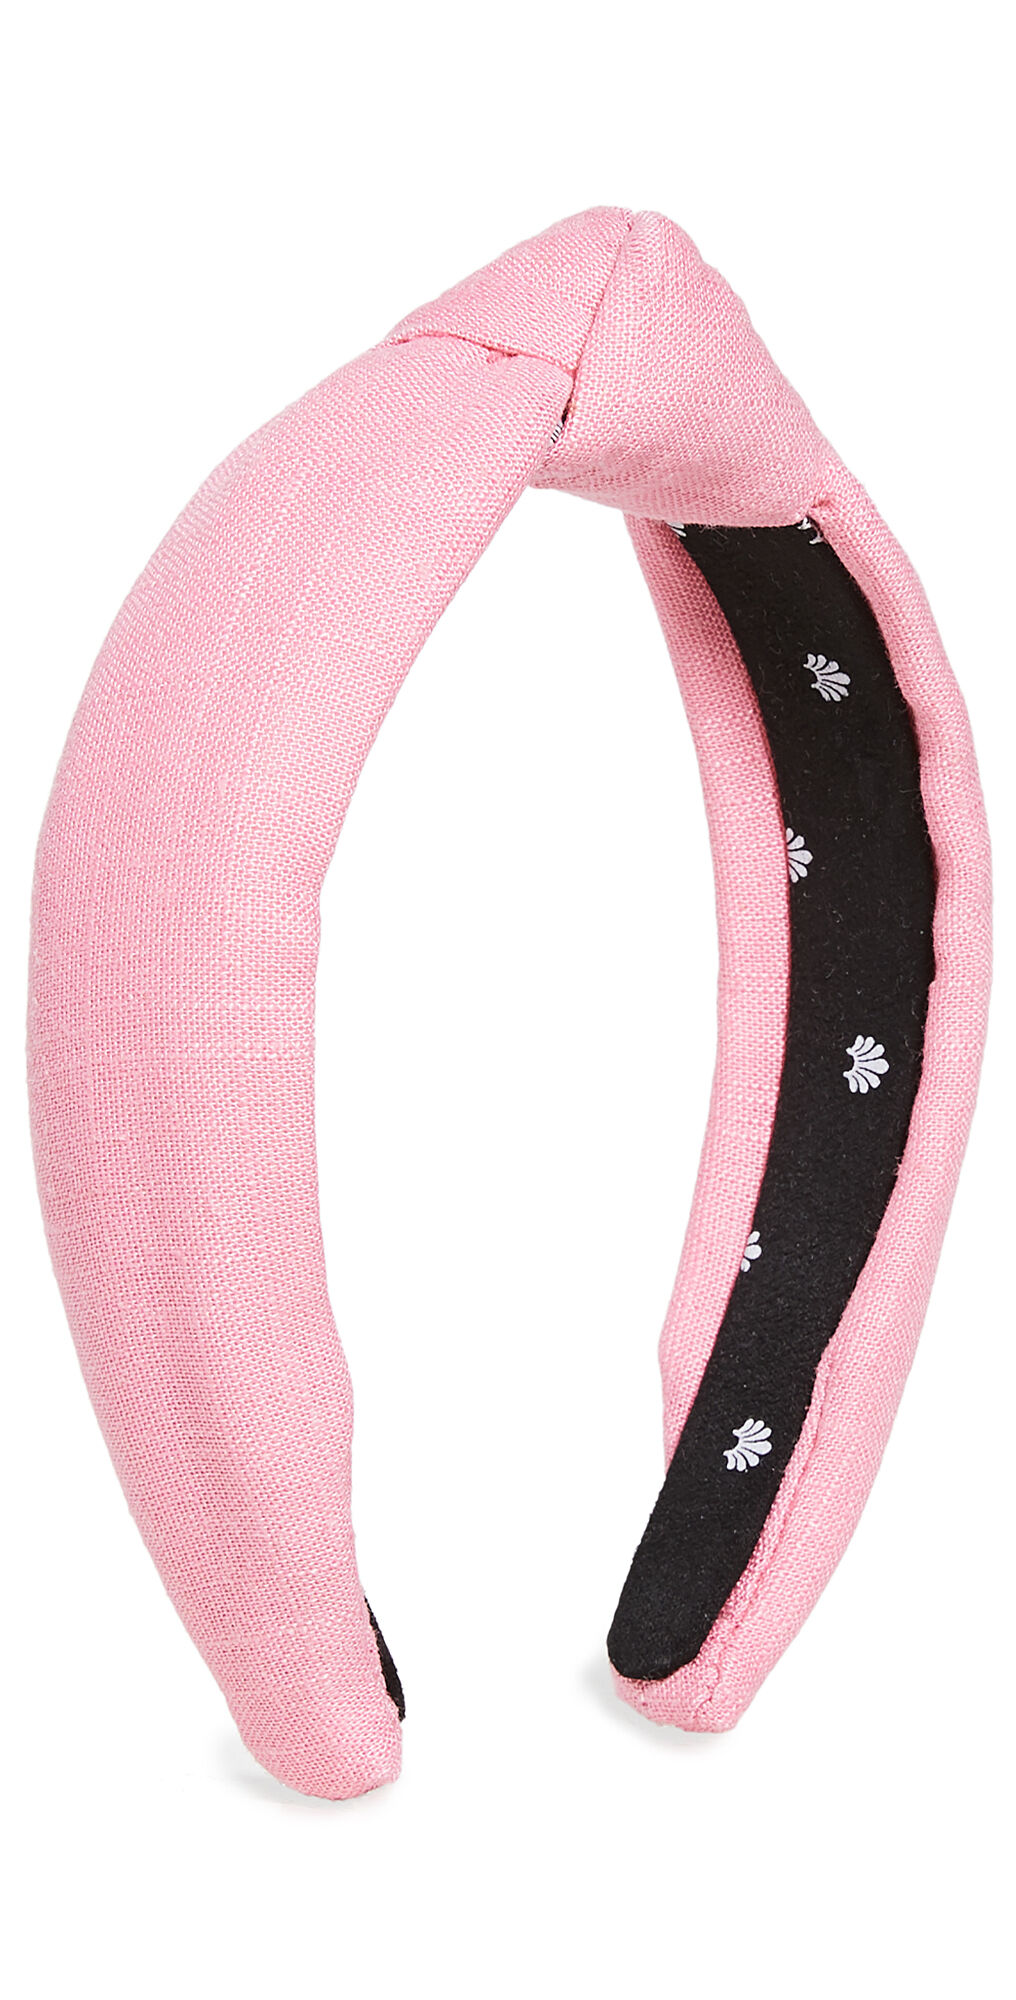 Lele Sadoughi Linen Slim Knotted Headband Pink One Size  Pink  size:One Size